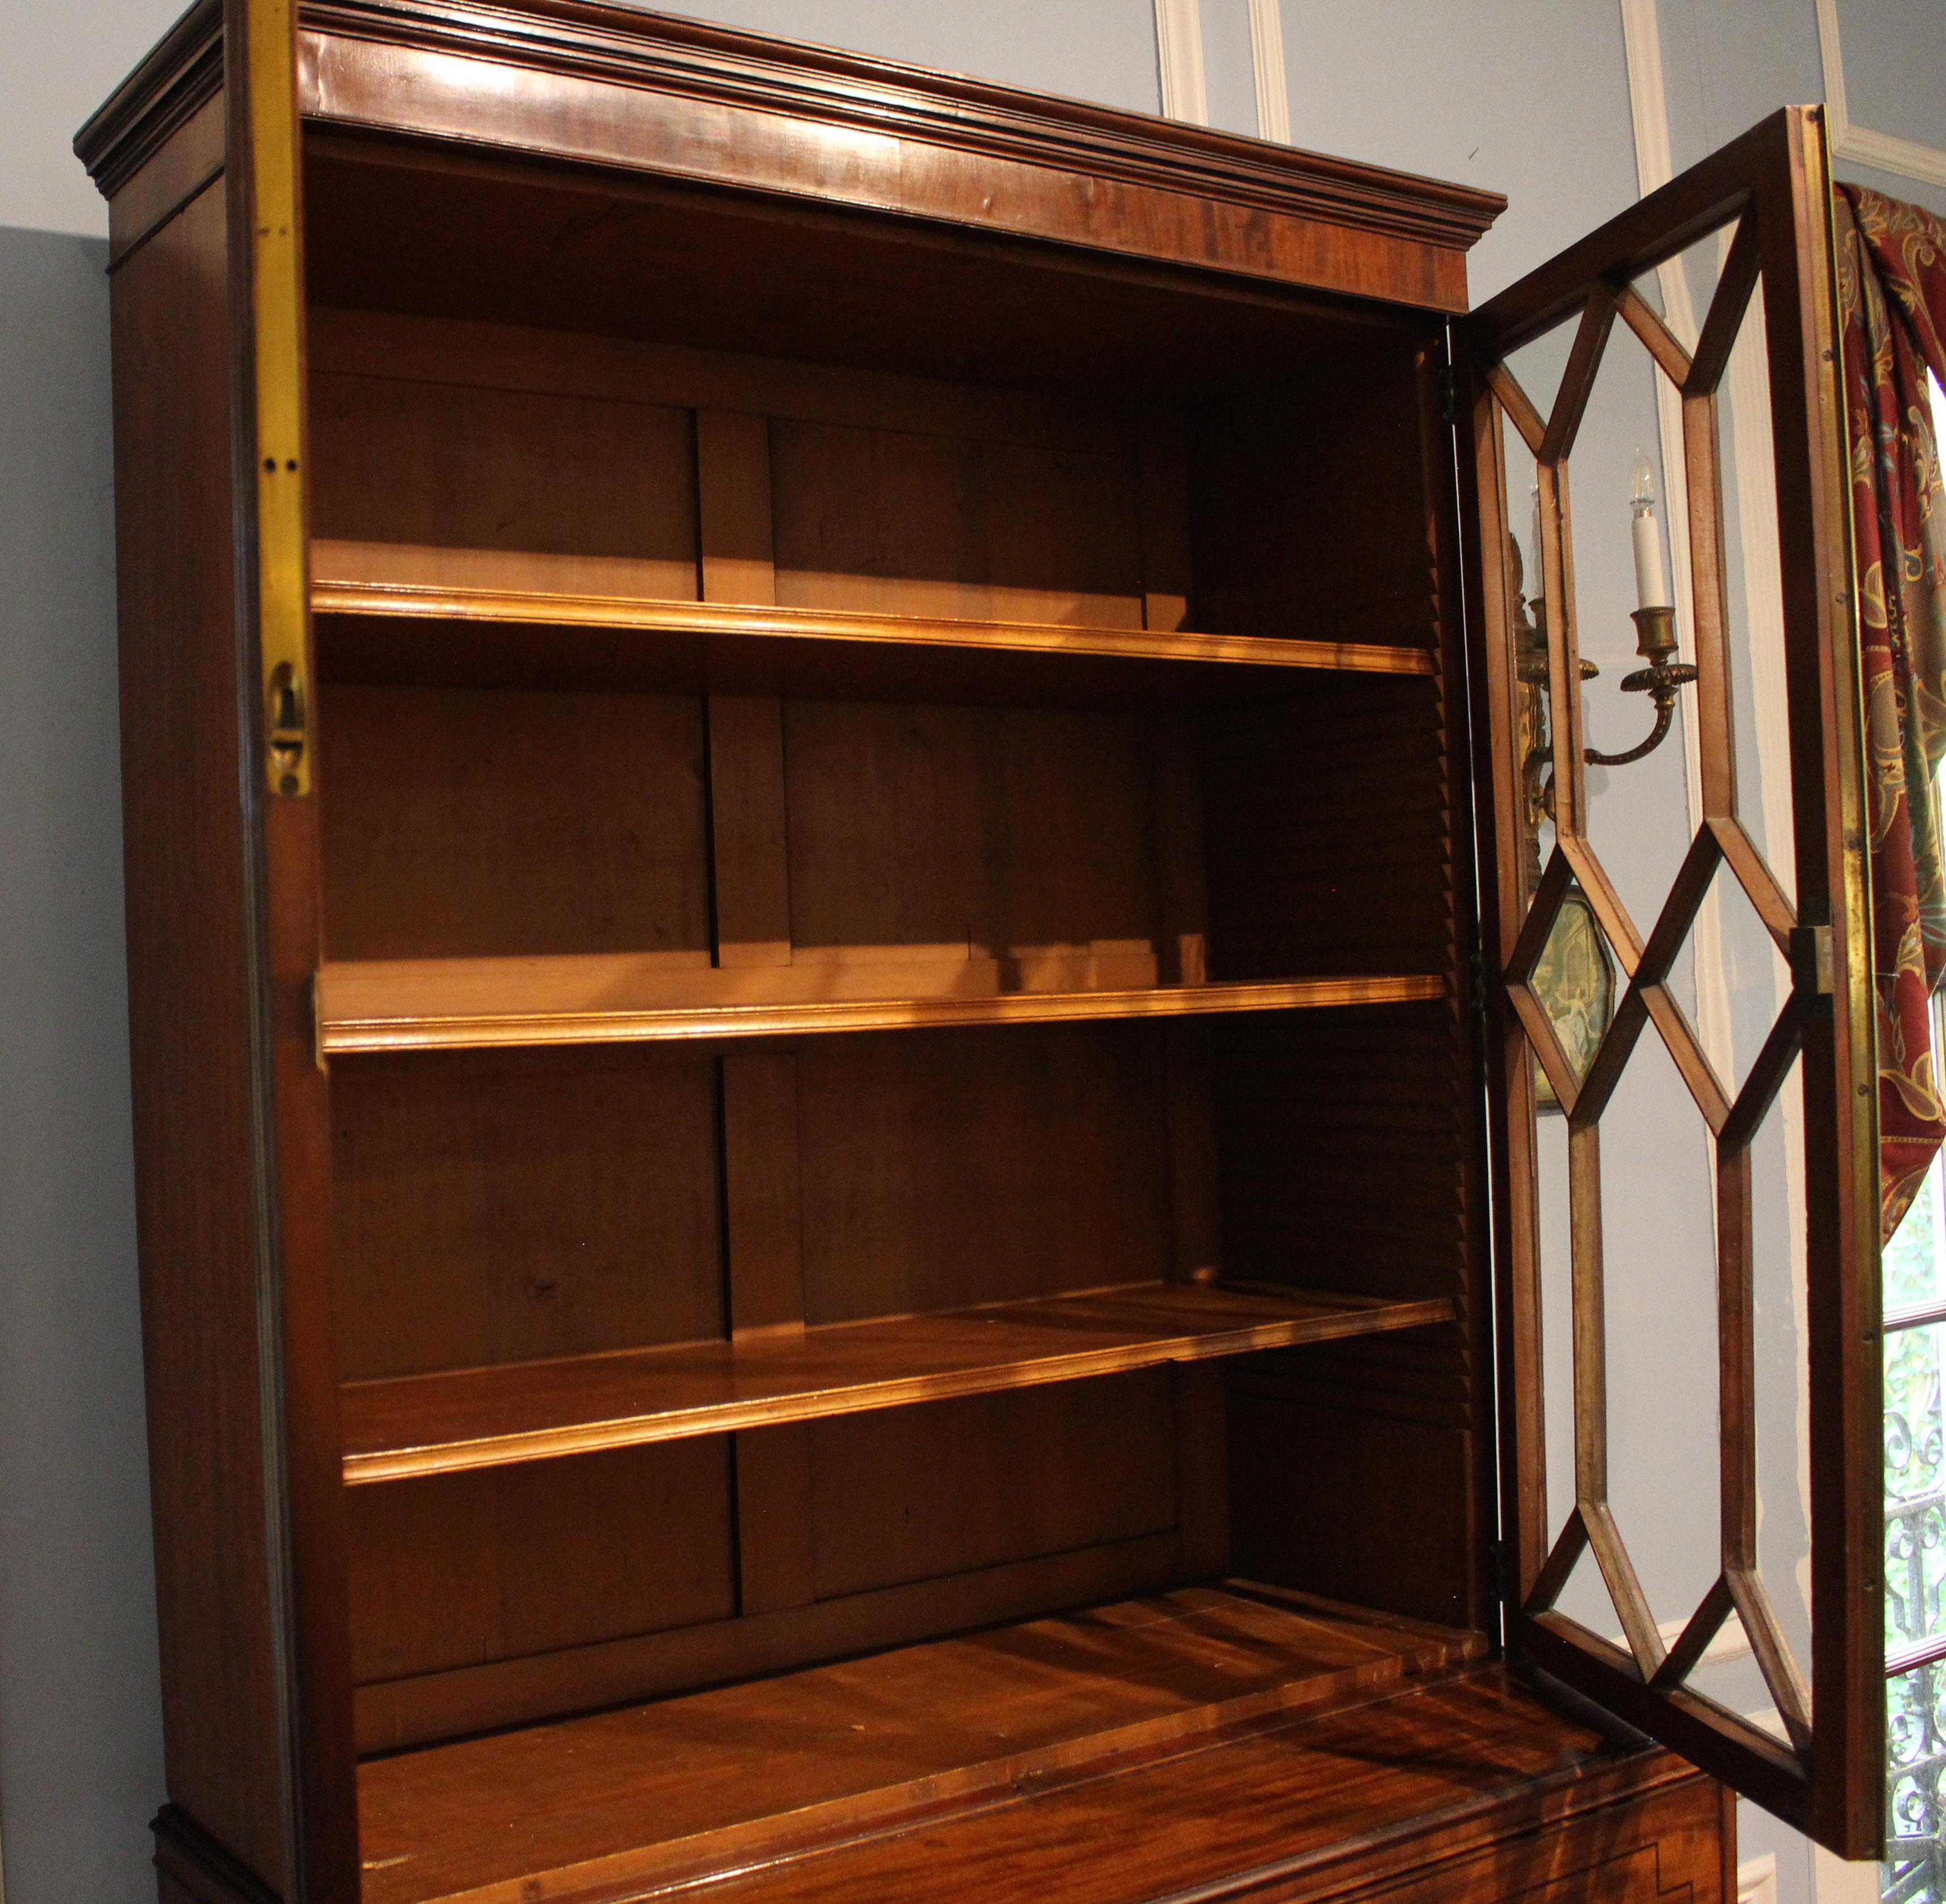 circa 1800 secretaire bookcase, English, George III-Regency. Mahogany; oak secondary wood; ebony accent molding & line inlays on the drawer fronts. Astragal glazed doors, 3 adjustable original shelves & paneled back construction. Crown molding with